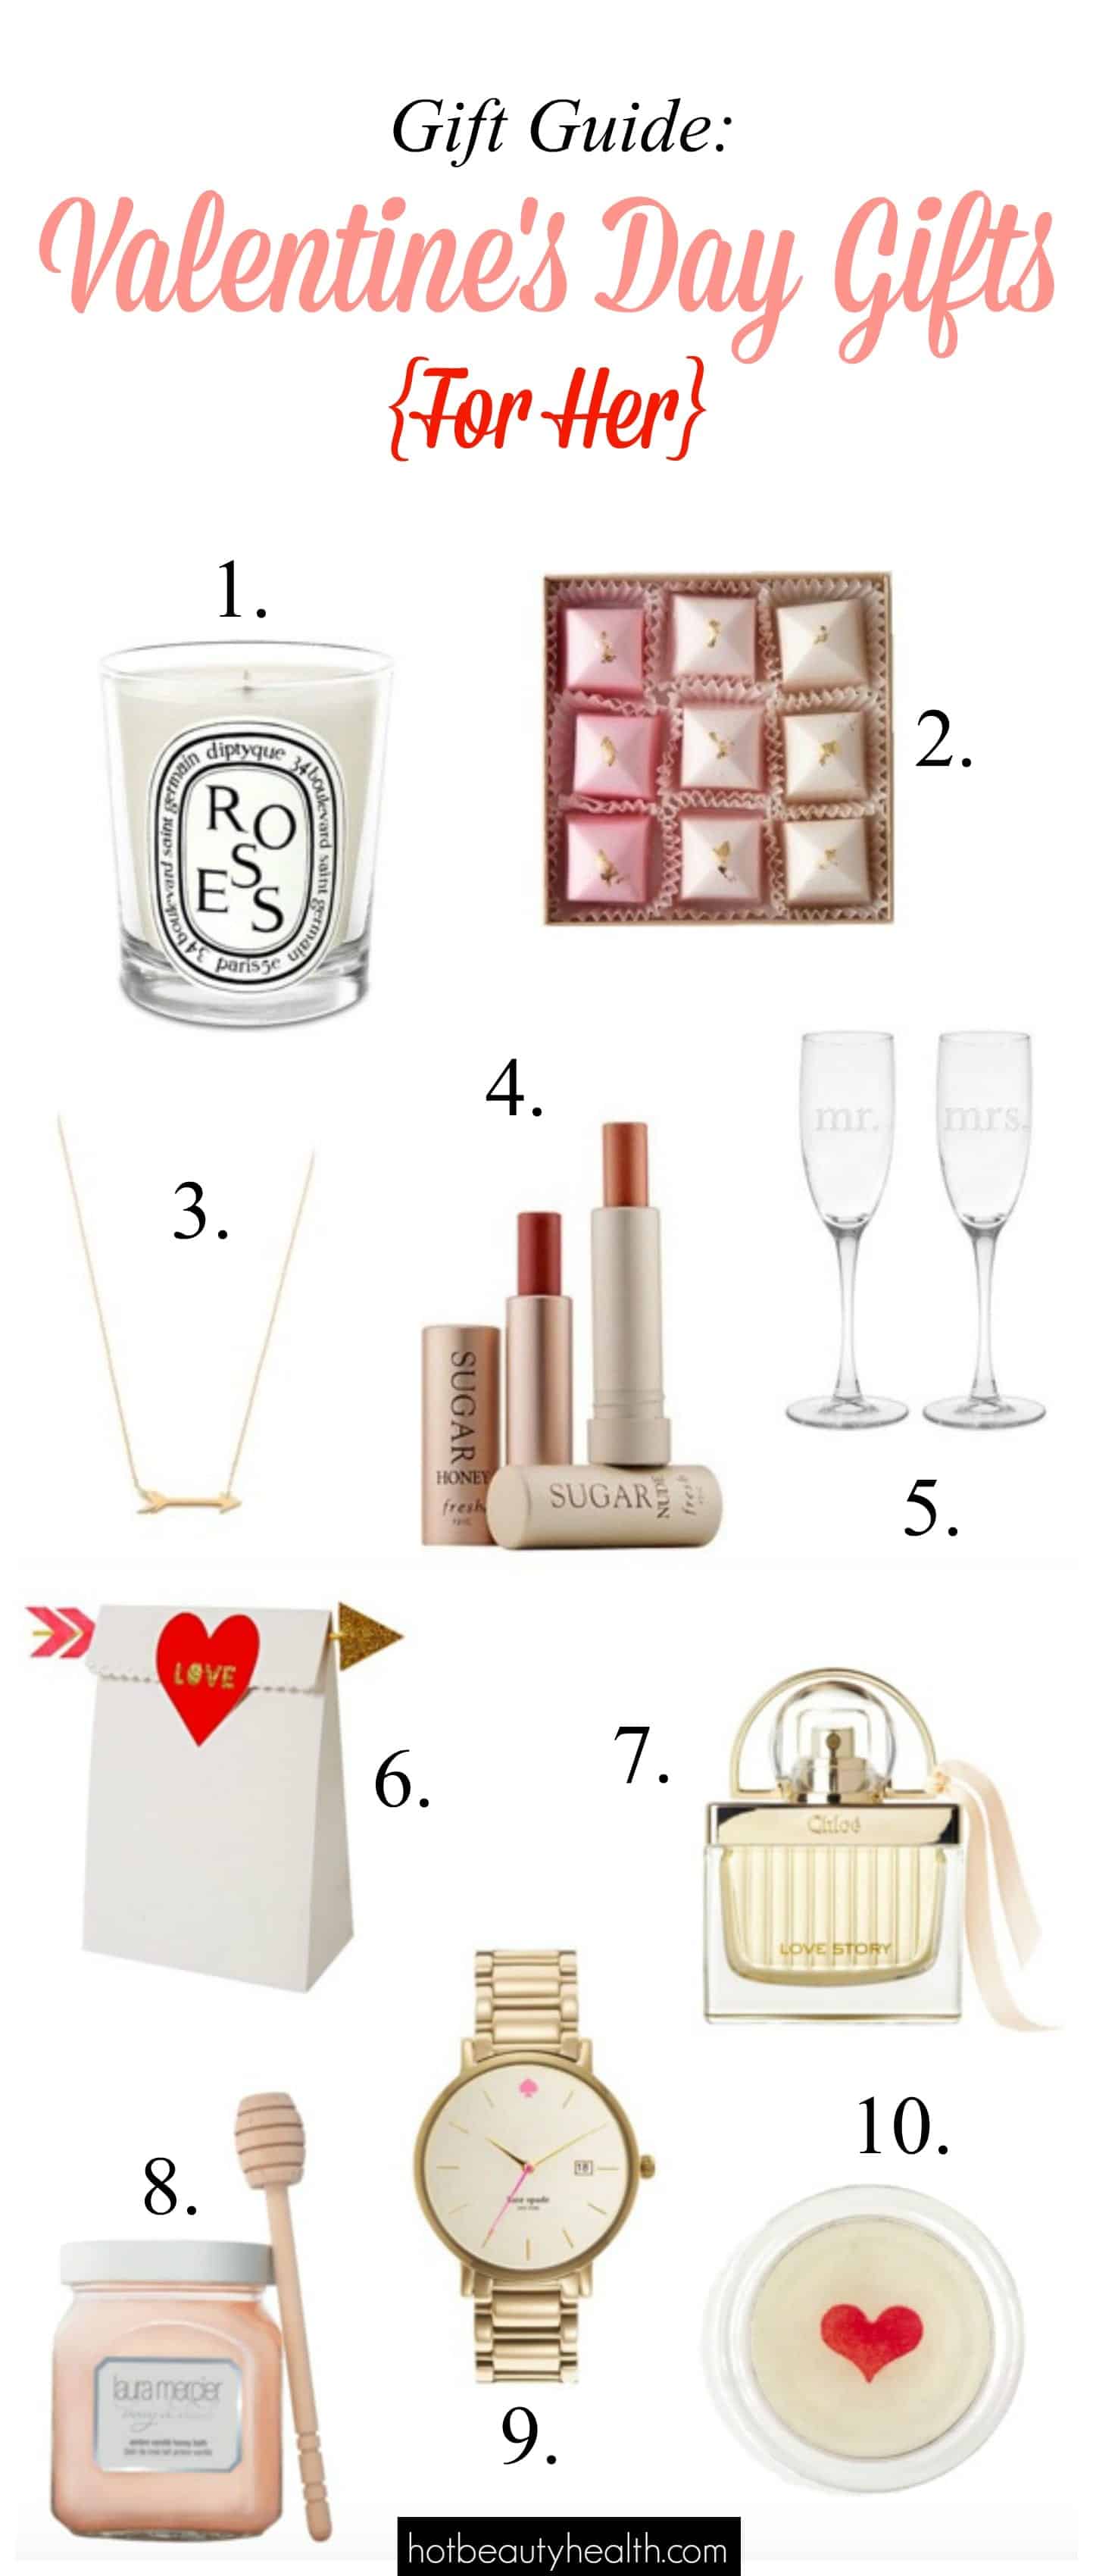 Gift Guide: 10 Valentine’s Day Gifts for Her